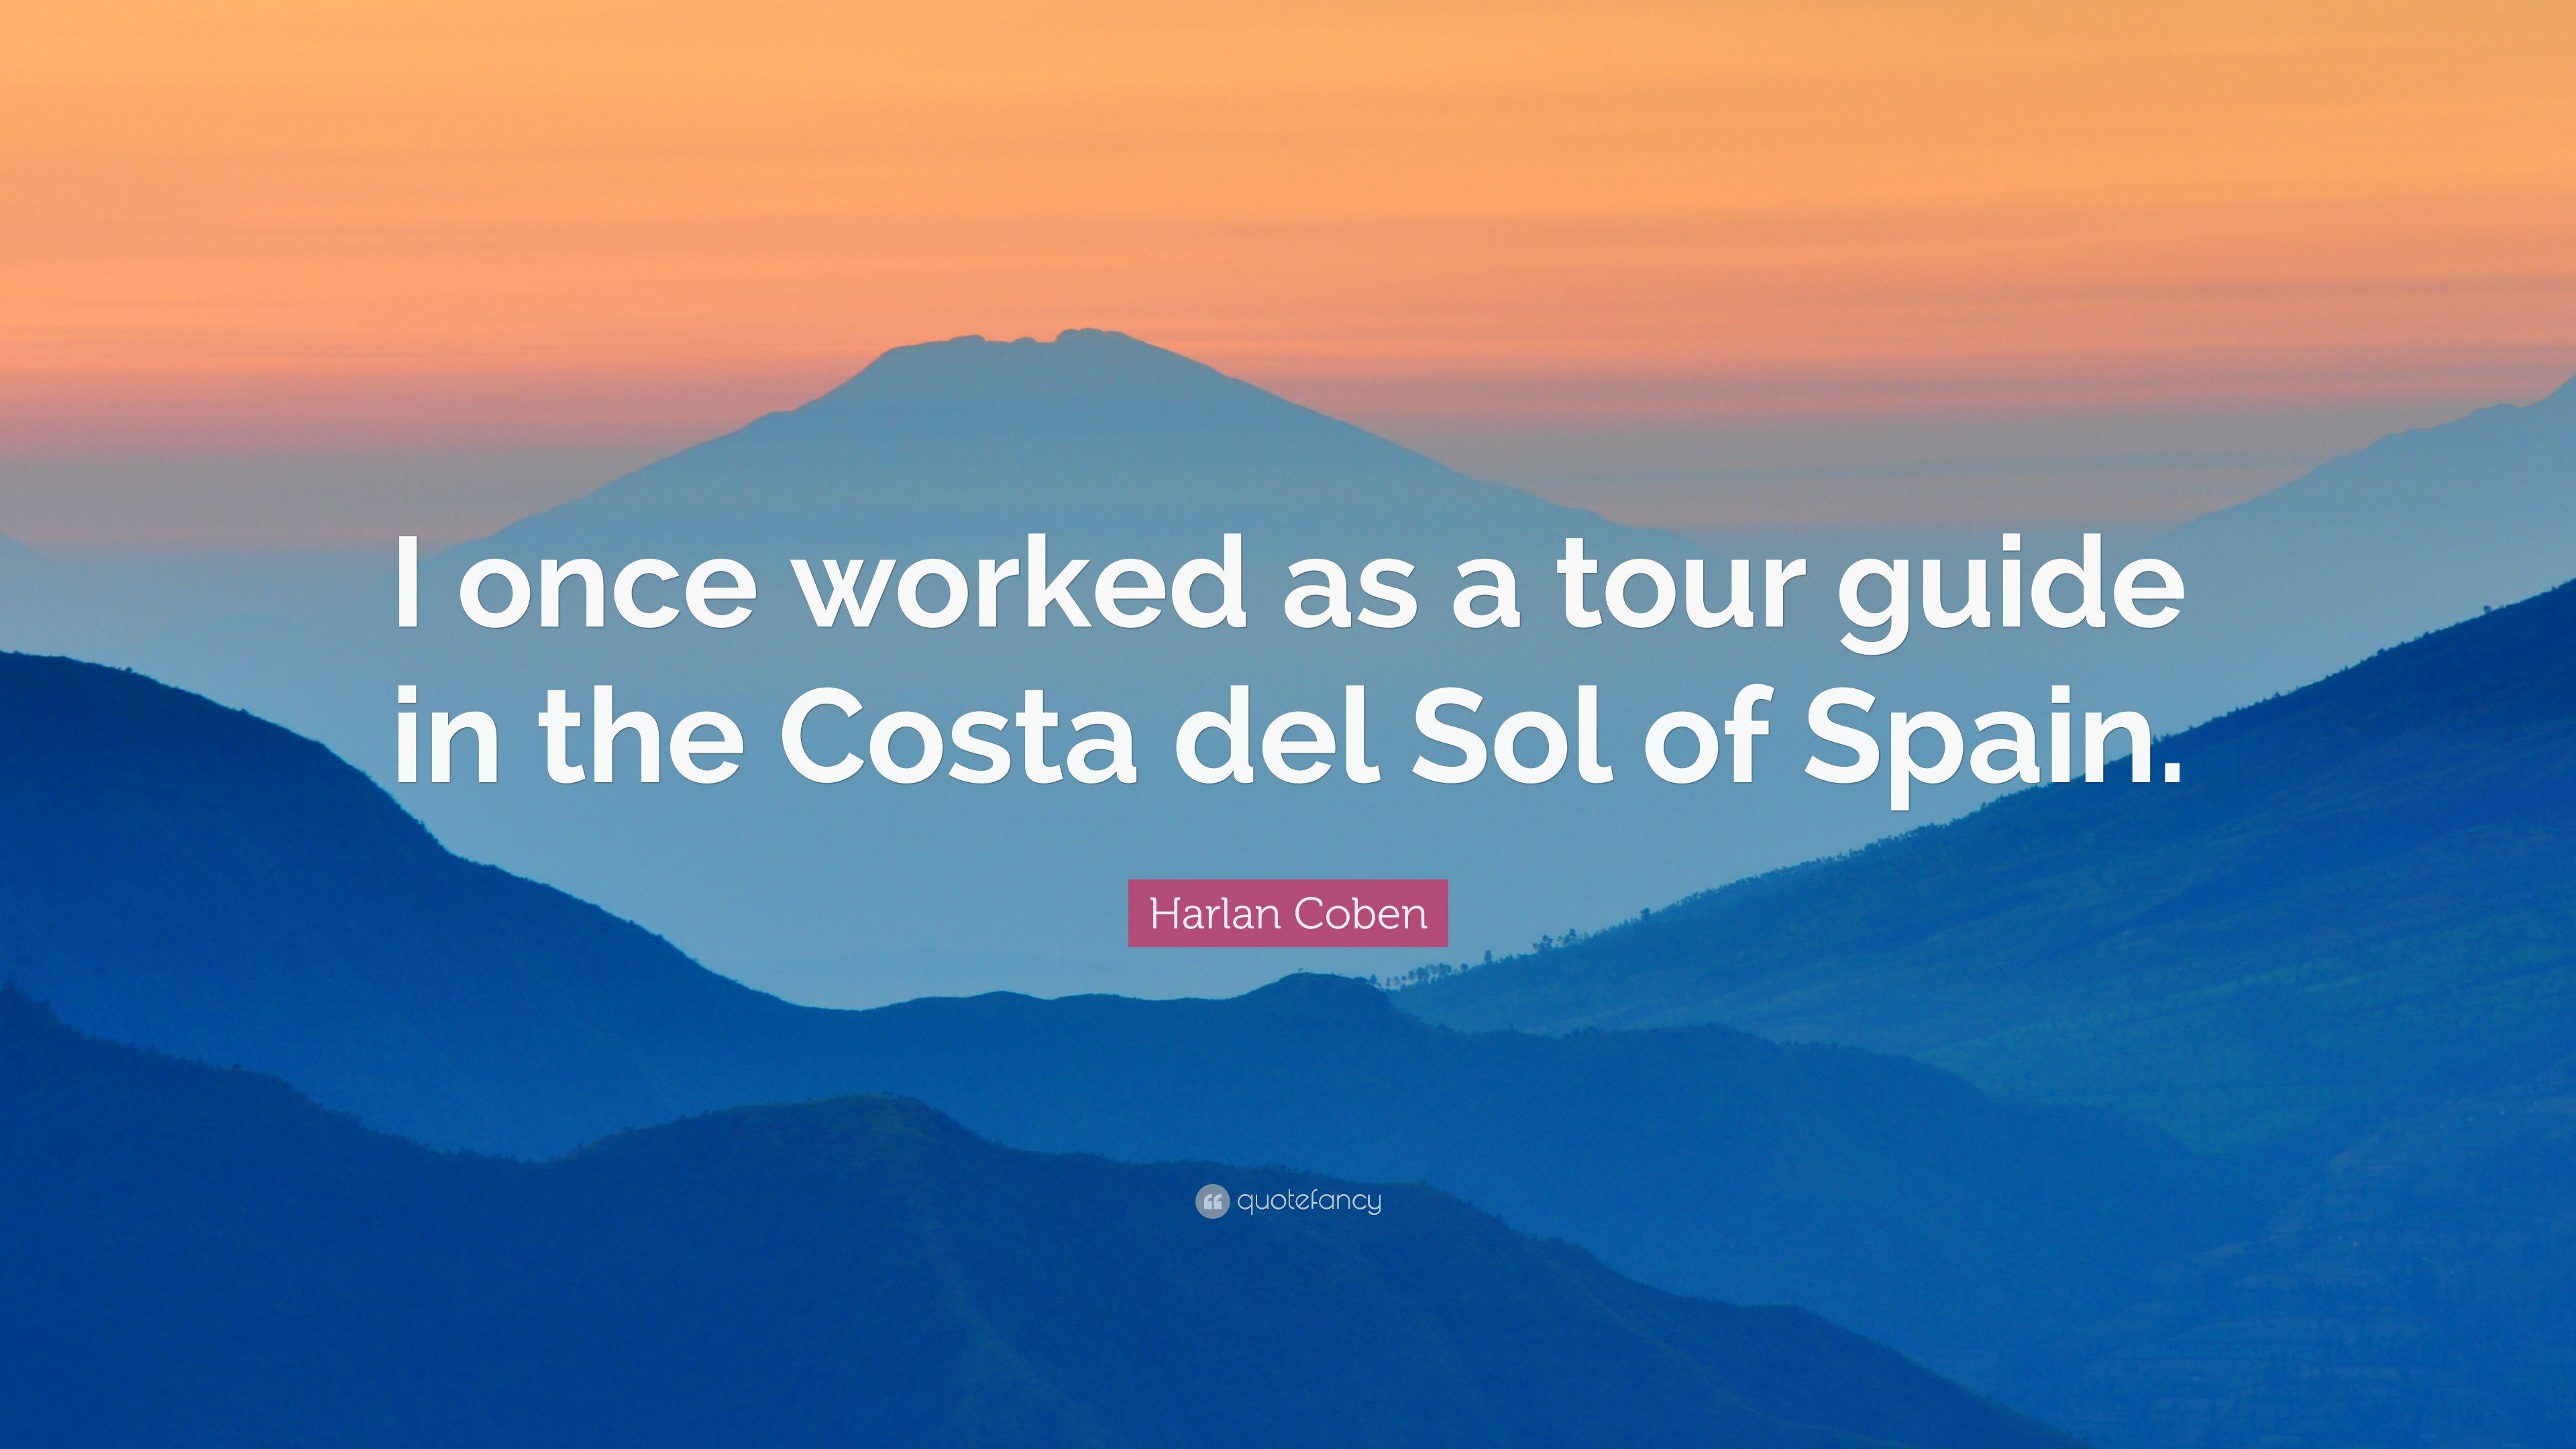 Harlan Coben Quote: “I once worked as a tour guide in the Costa del